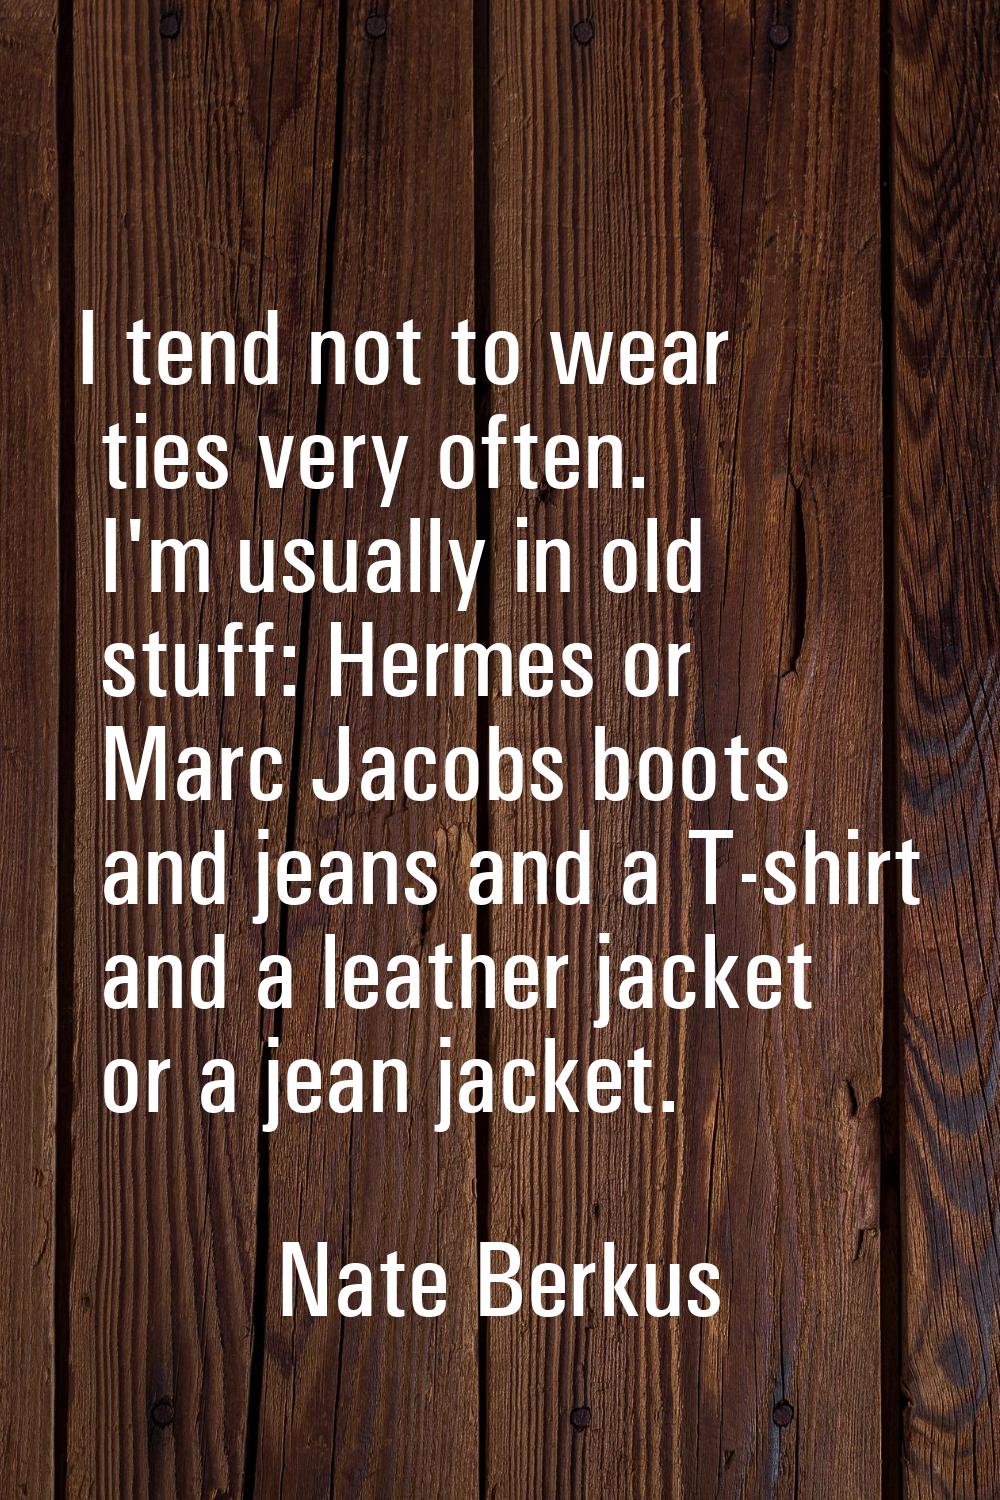 I tend not to wear ties very often. I'm usually in old stuff: Hermes or Marc Jacobs boots and jeans